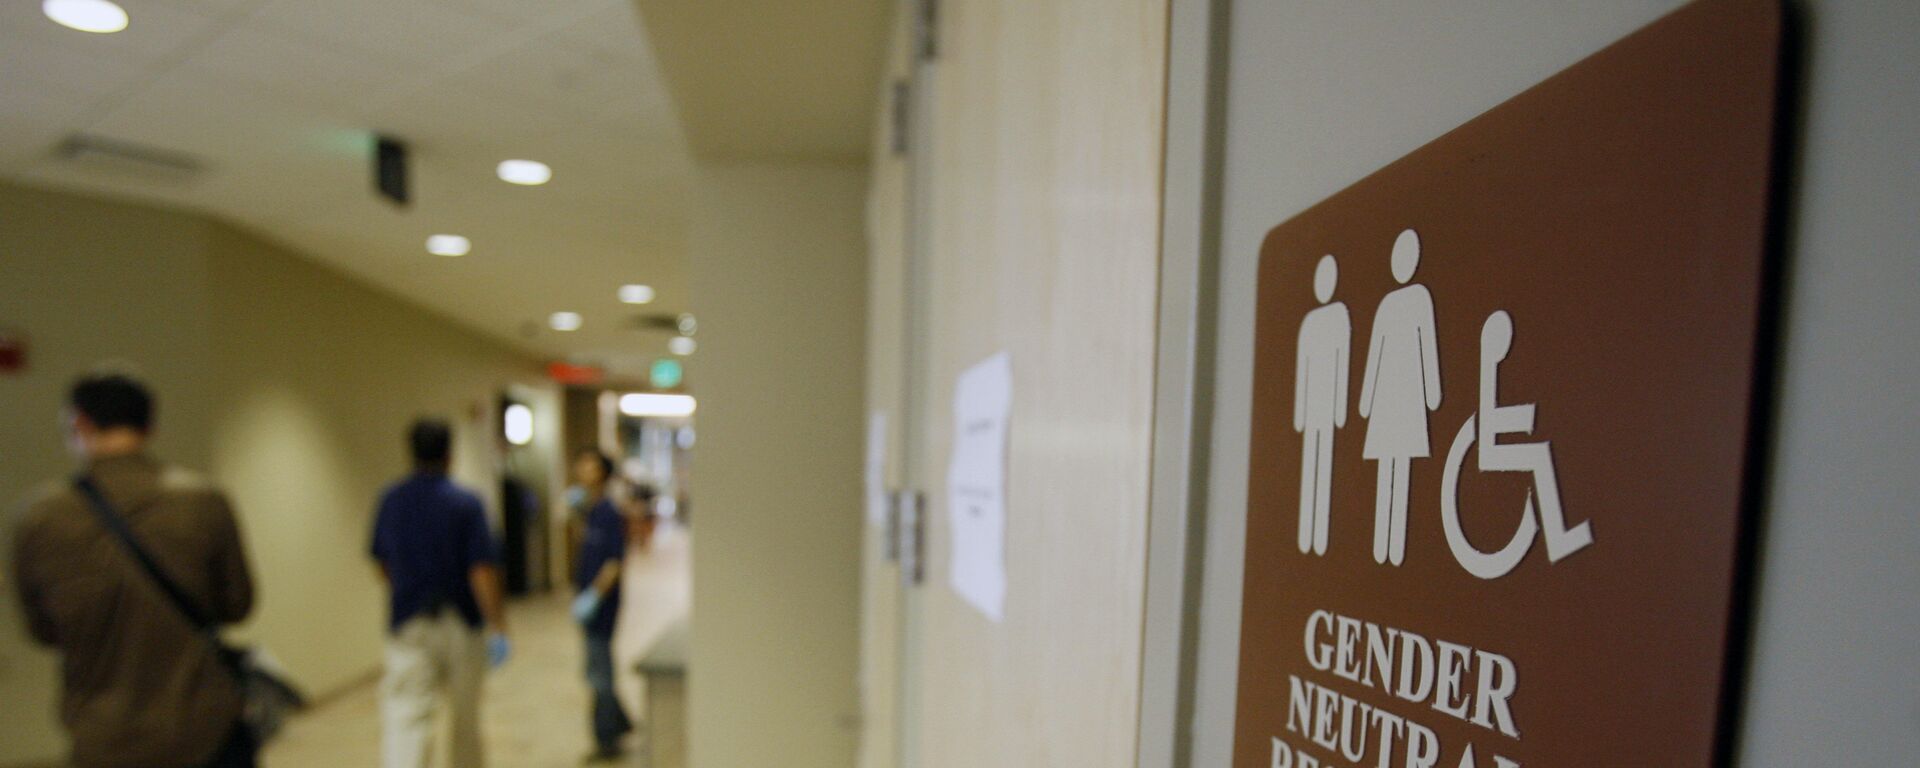 In this Aug. 23, 2007 file photo, a sign marks the entrance to a gender neutral restroom at the University of Vermont in Burlington, Vt. - Sputnik International, 1920, 17.11.2021